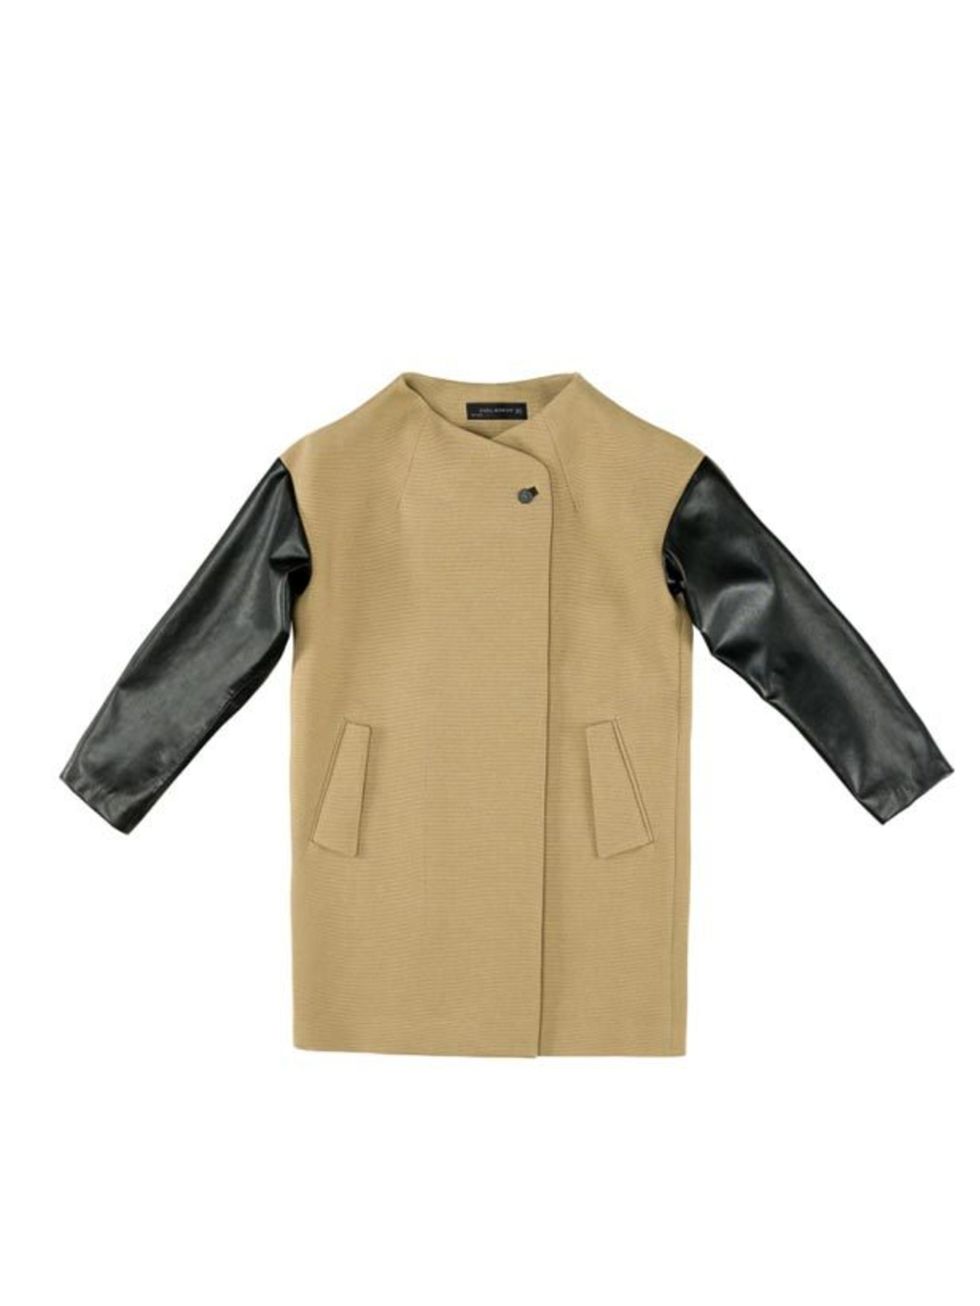 <p><a href="http://www.zara.com/webapp/wcs/stores/servlet/product/uk/en/zara-S2011/61134/289030/STUDIO%2BCOAT%2BWITH%2BCOMBINATION%2BSLEEVE"> </a></p><p>You cant go wrong with leather or camel so invest in this stand-out staple to see you through seasons